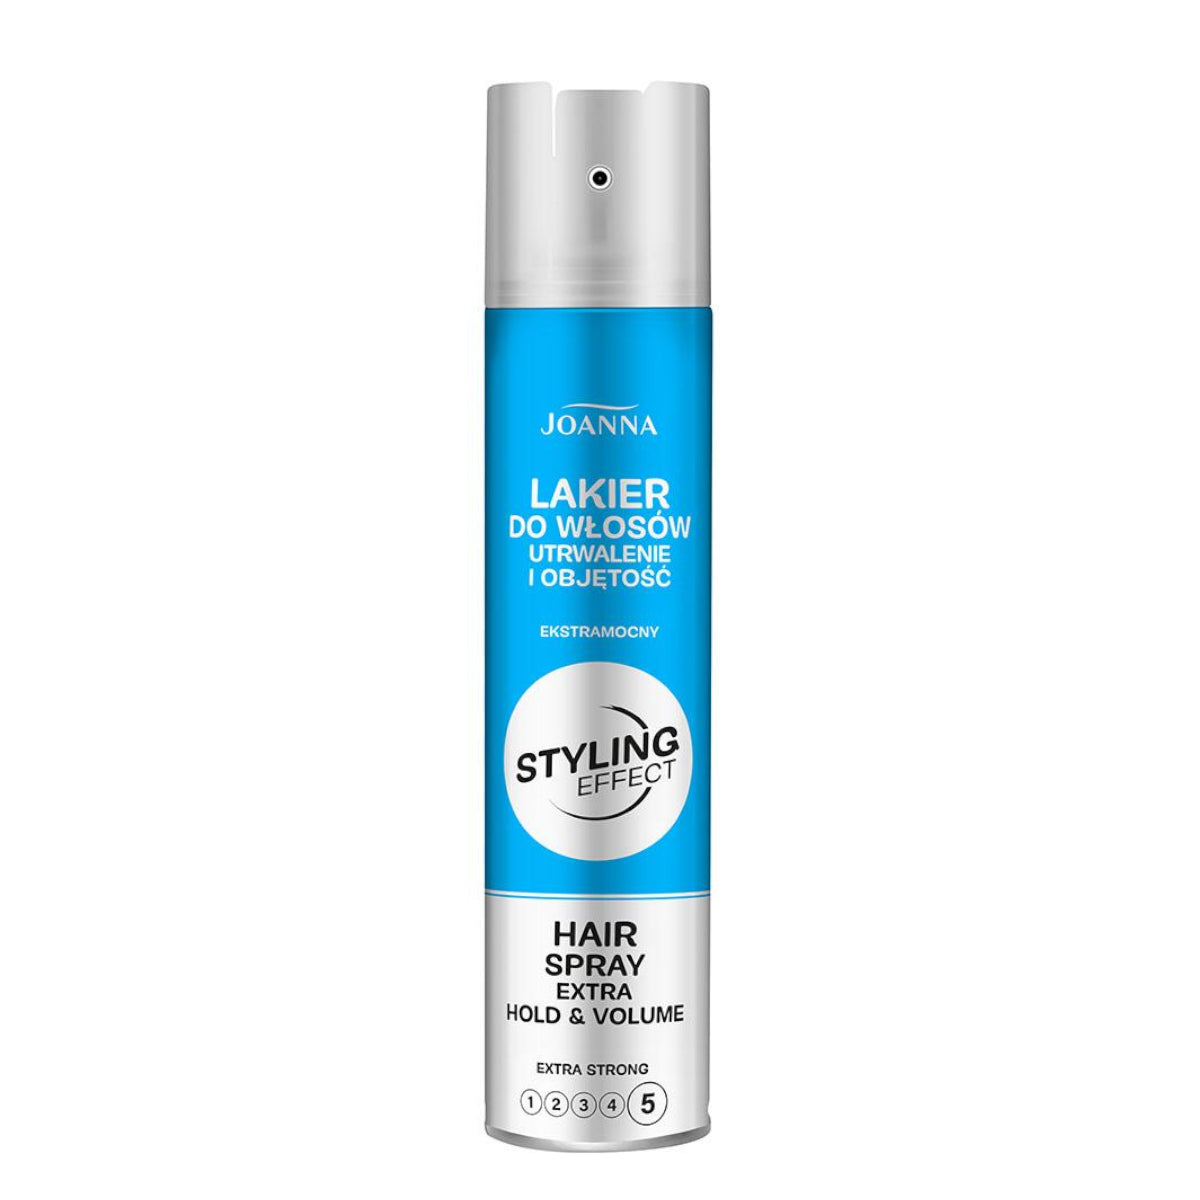 Joanna Styling Effect Hair Spray Hold & Volume Extra Strong